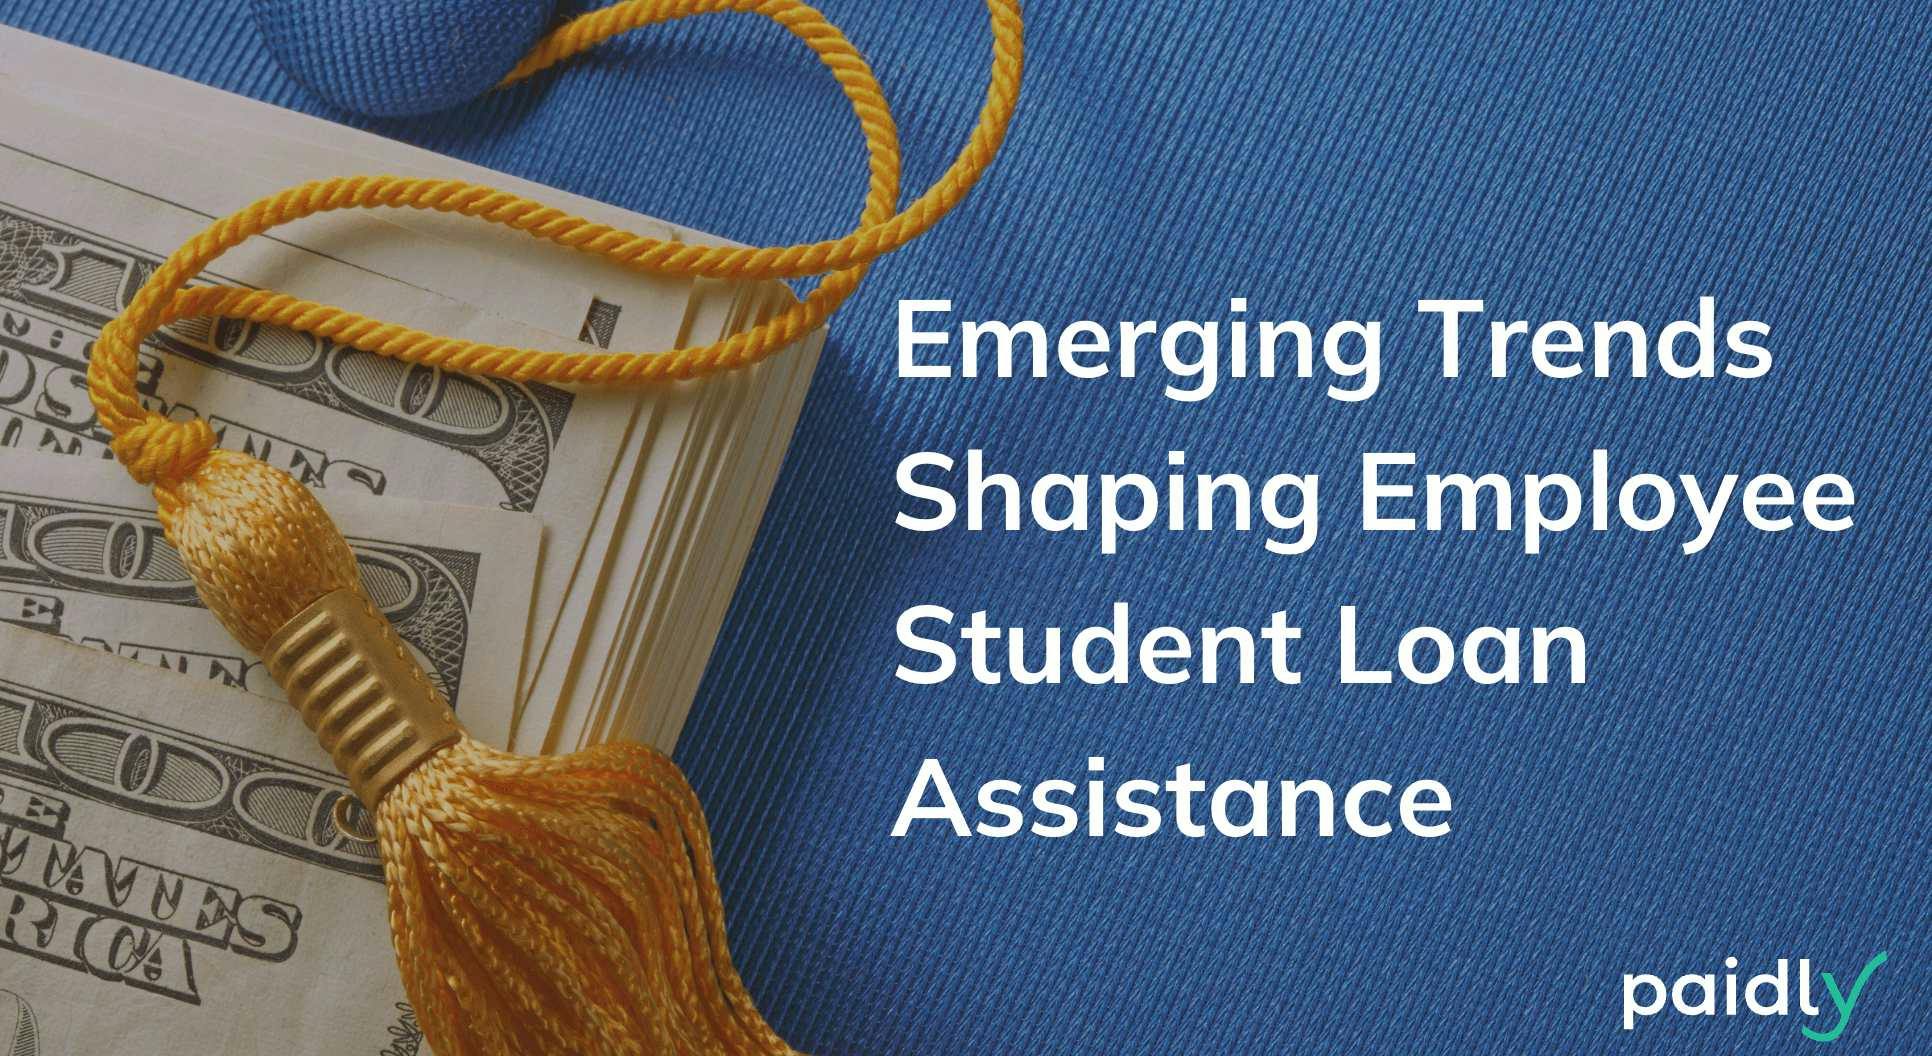 Emerging Trends shaping employee student loan assistance